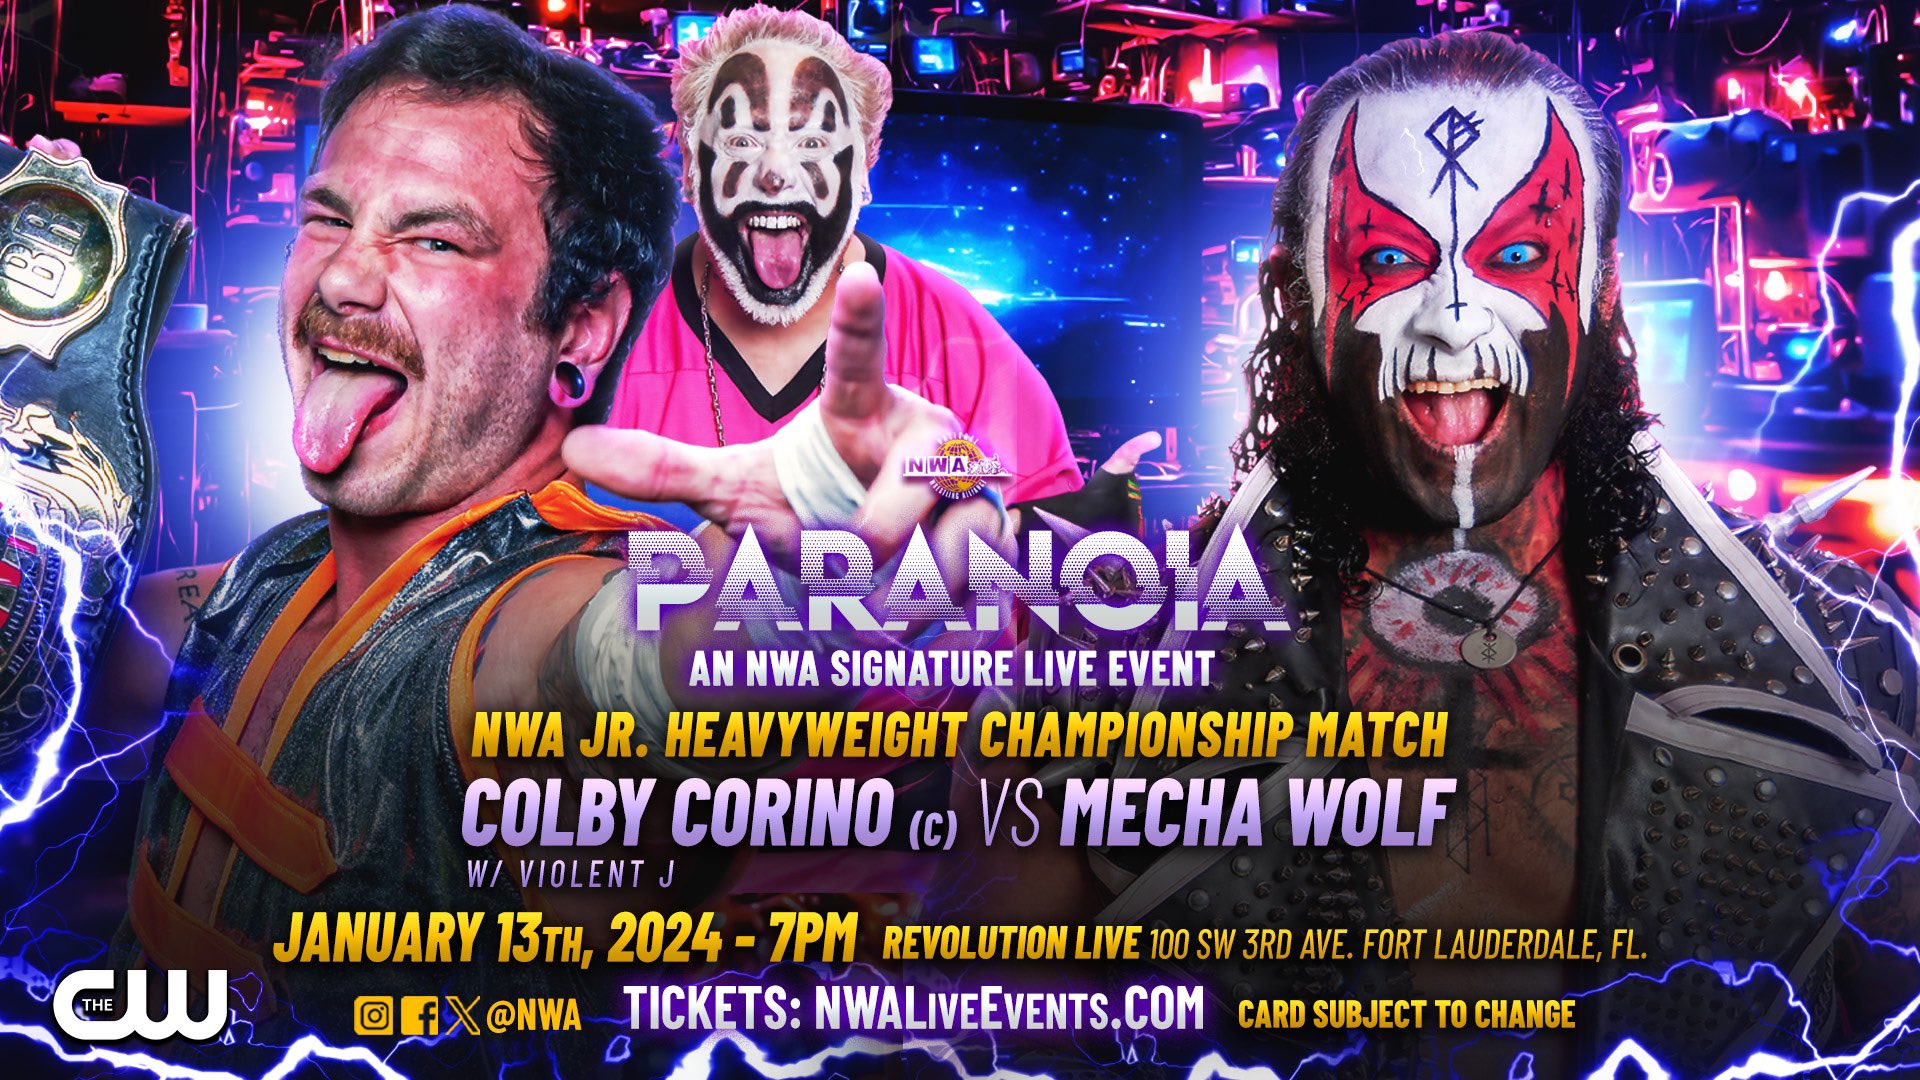 Colby Corino Set To Defend The NWA Junior Heavyweight Championship at NWA Paranoia Against Mecha Wolf